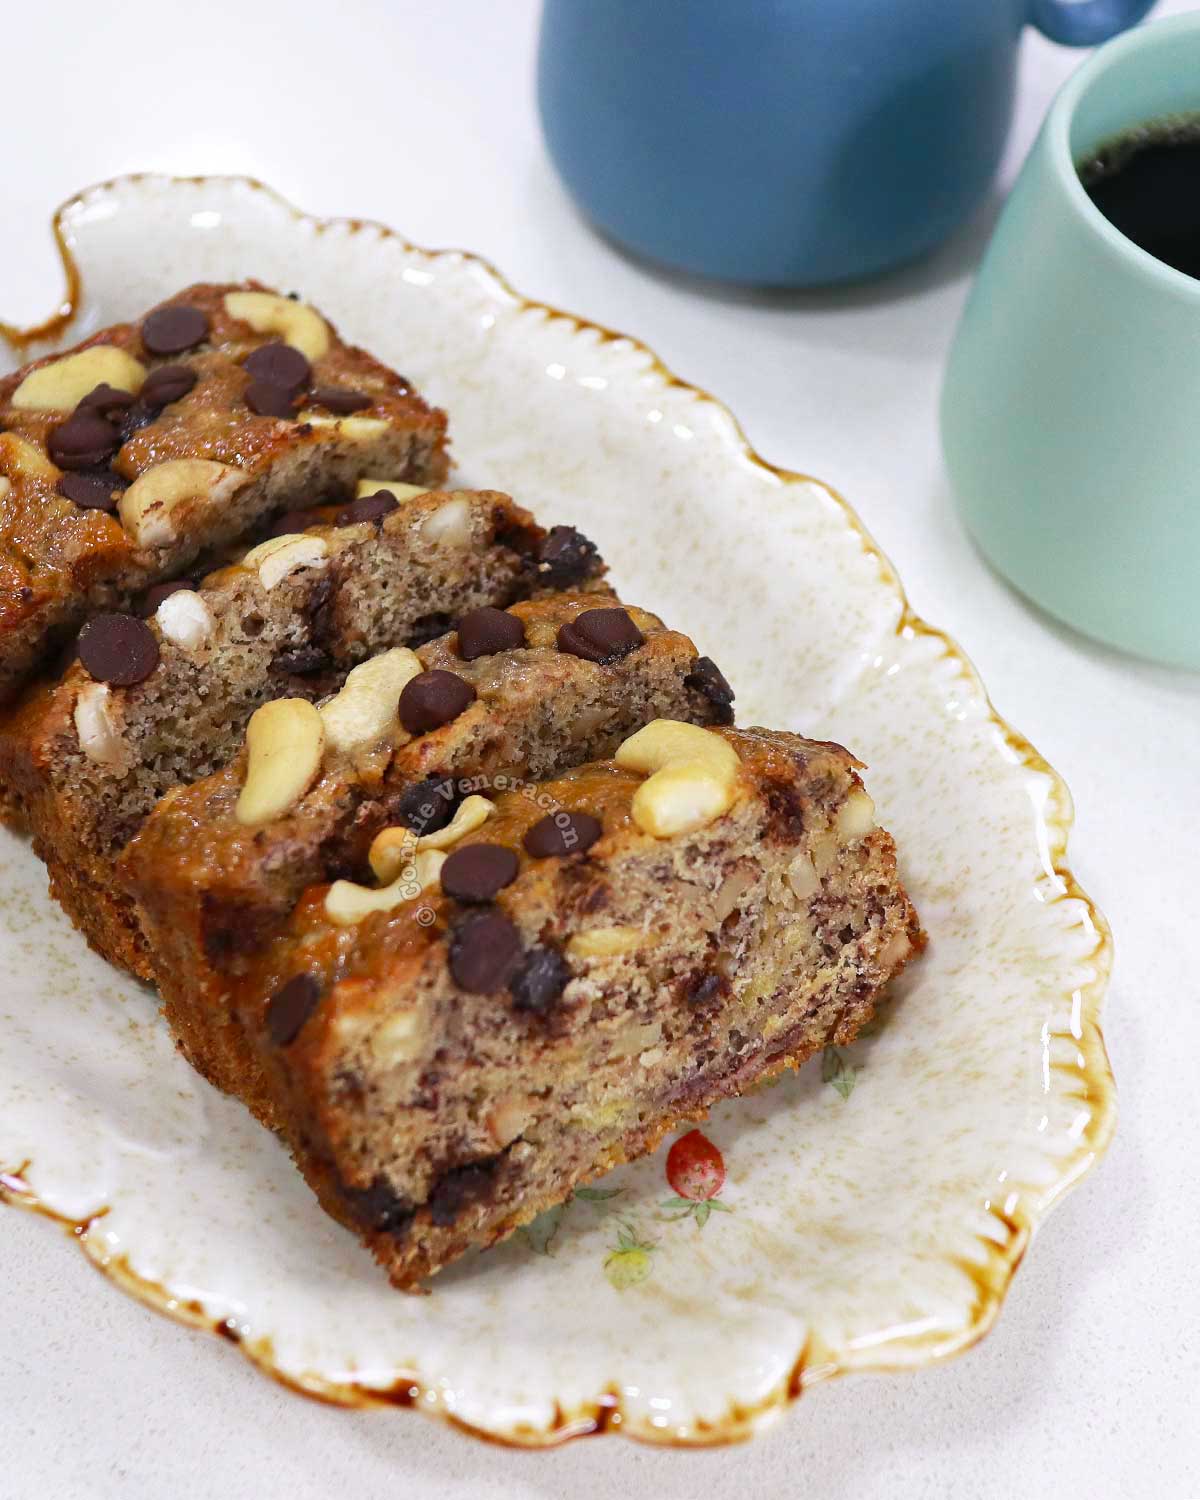 Banana bread (it's a cake) with cachew nuts and chocolate morsels